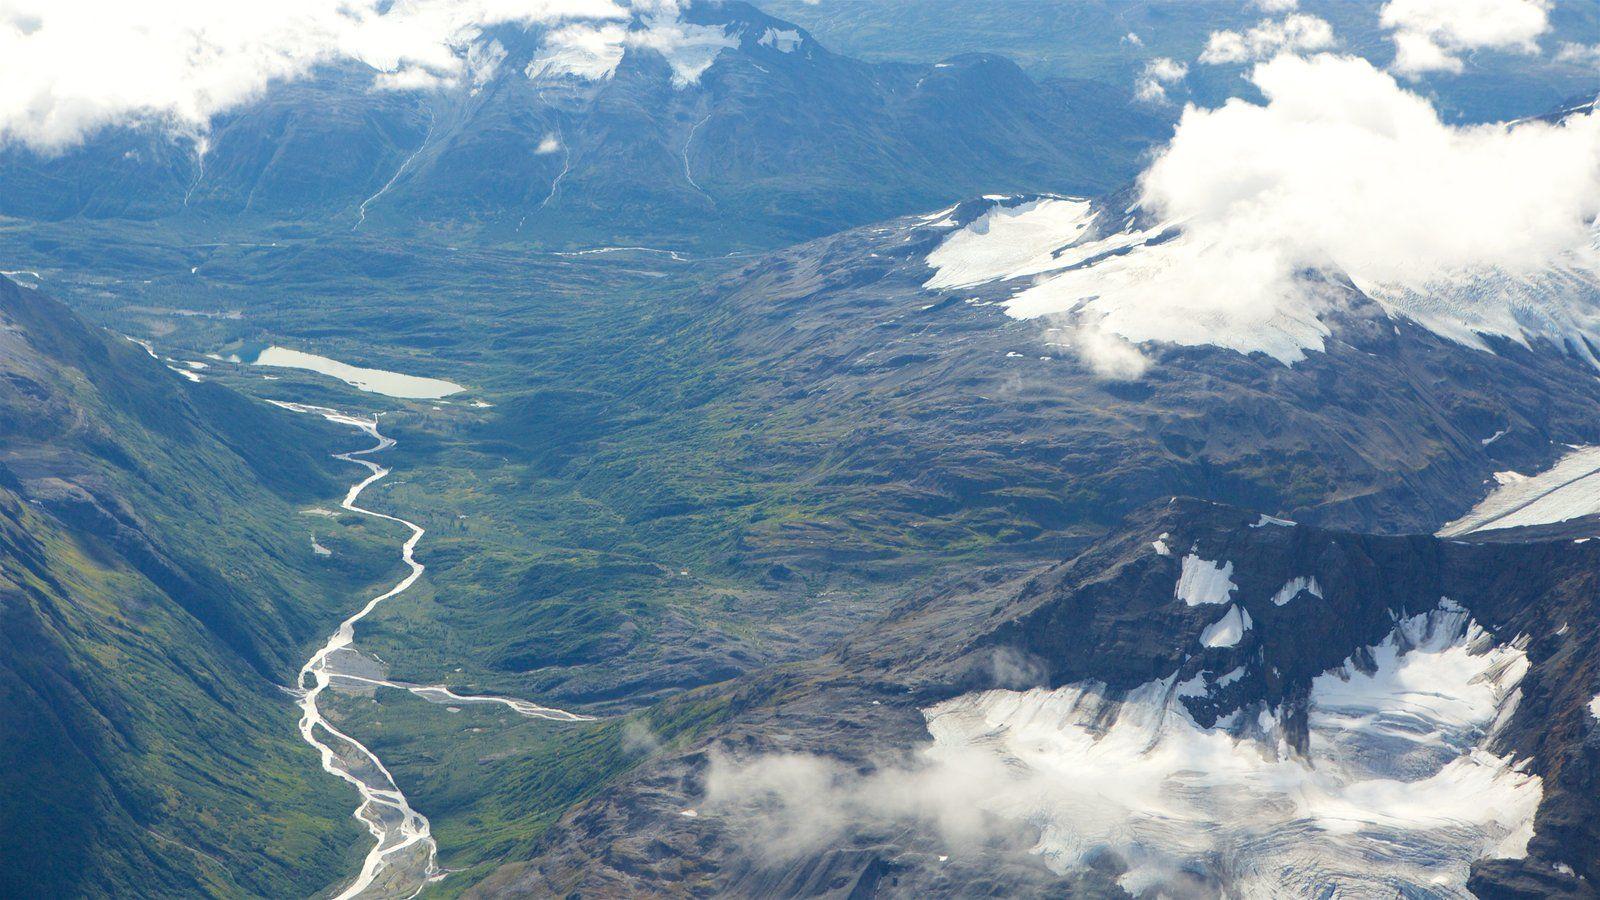 Mountain Picture: View Image Of Wrangell St. Elias National Park